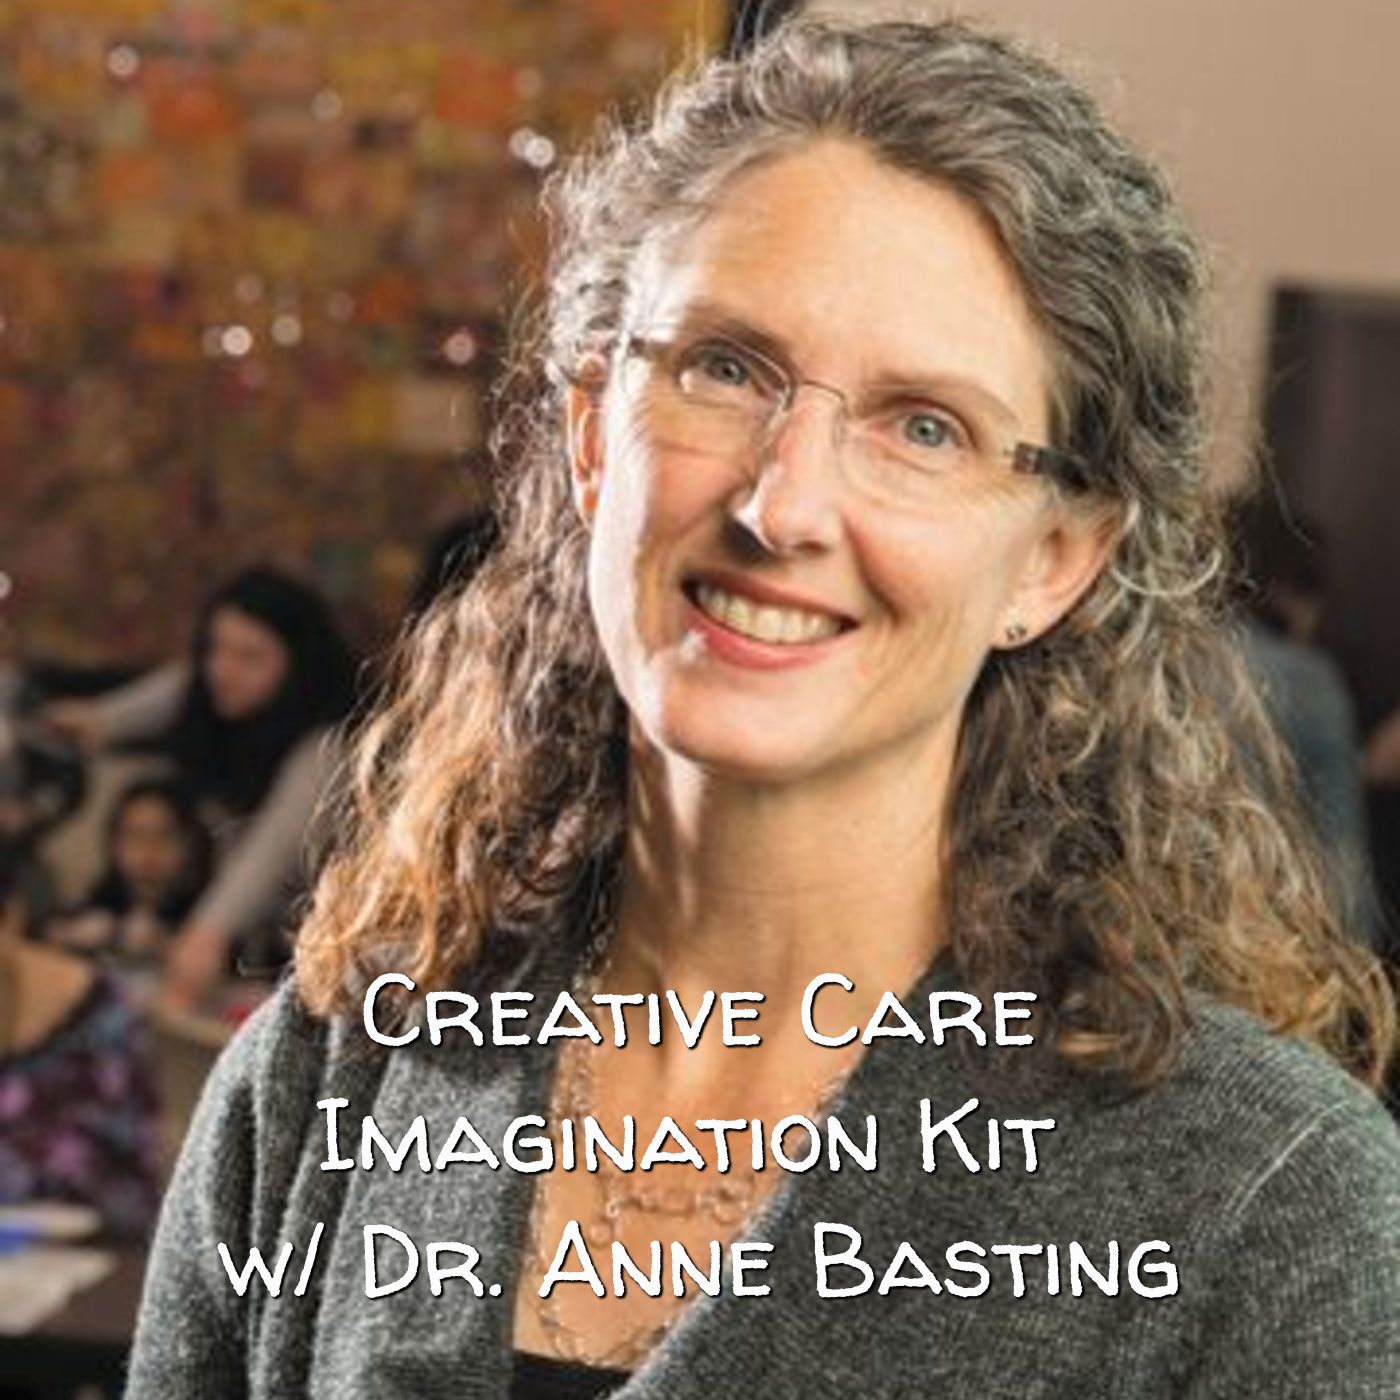 The Creative Care Imagination Kit with Dr. Anne Basting